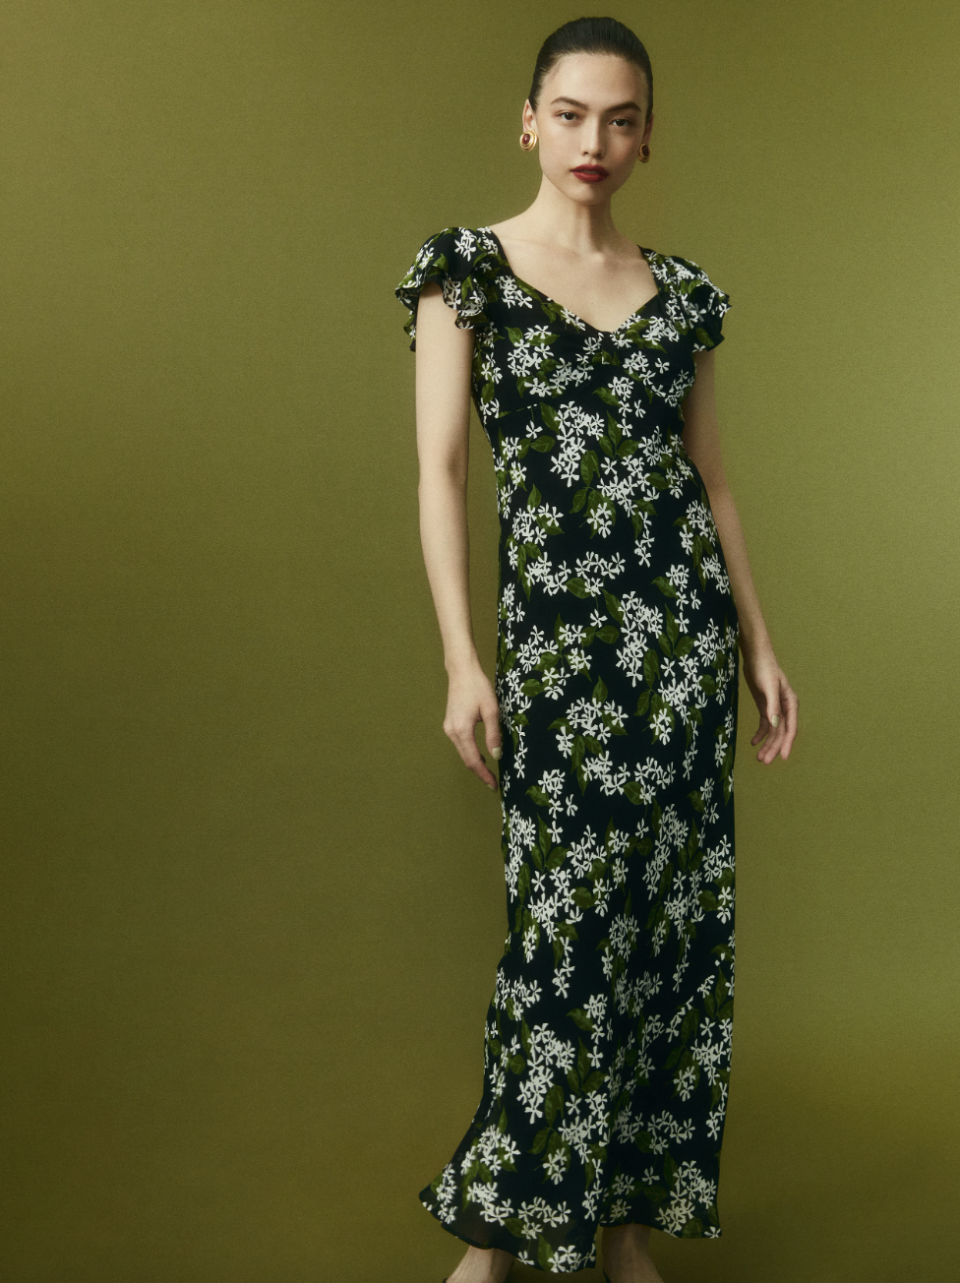 model wearing black dress with white and green floral print, Lisola Dress (Photo via Reformation)